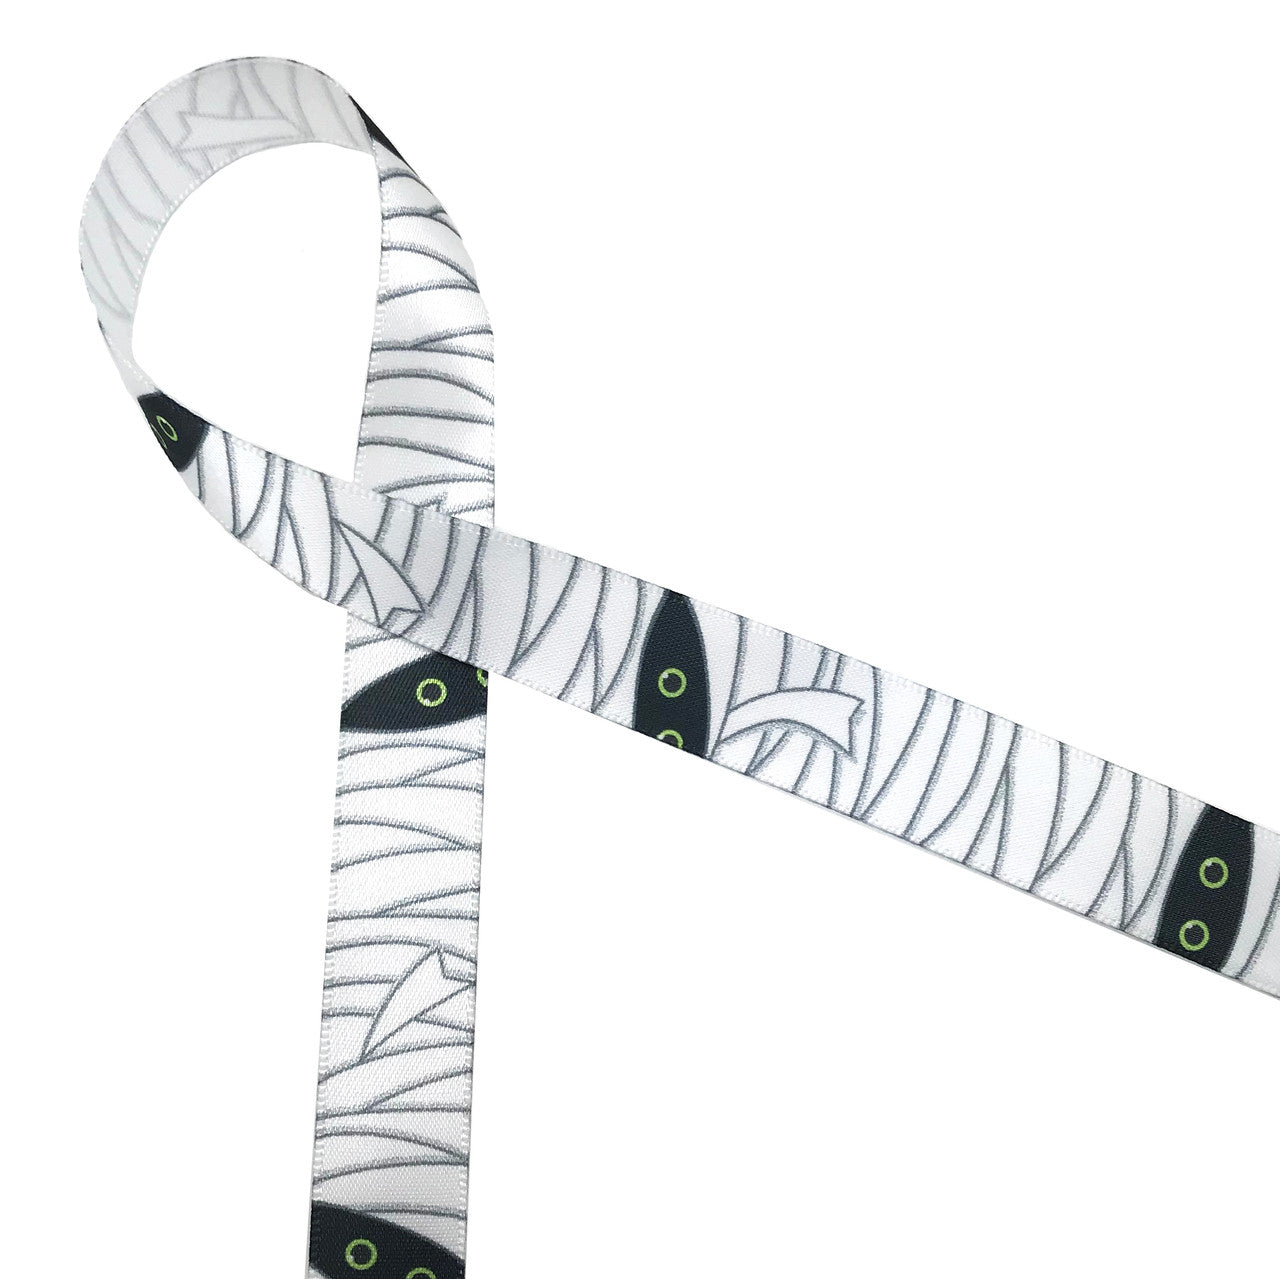 Mummy themed ribbon on 5/8" white single face satin  with lots of white wrapping and two green eyes peering out from the dark is a fun addition to any Halloween party!